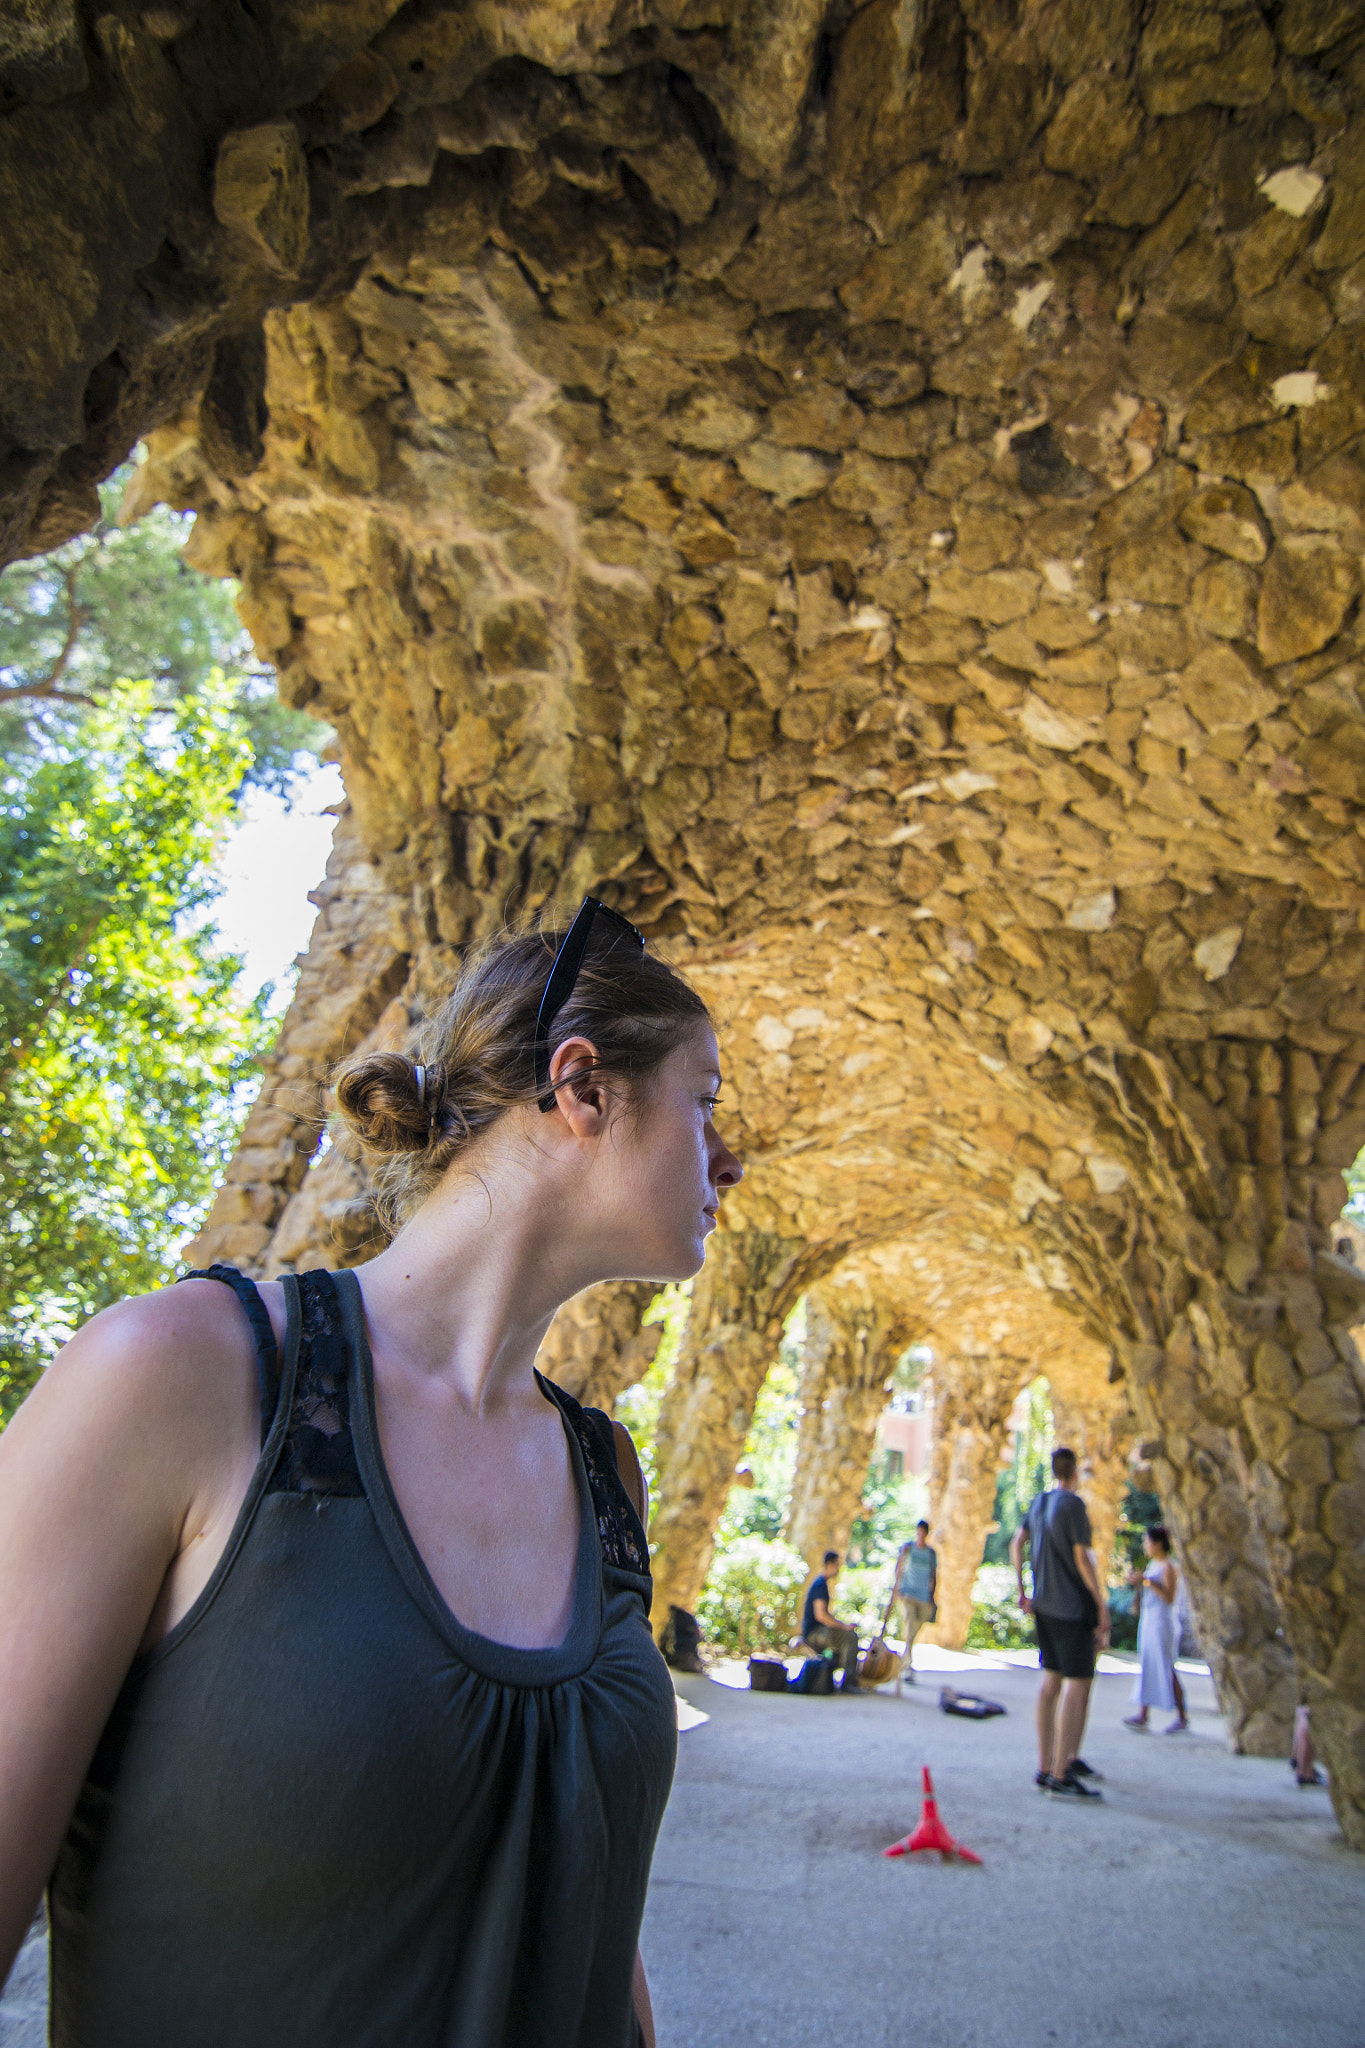 Nikon D3100 + Tokina AT-X 11-20 F2.8 PRO DX (AF 11-20mm f/2.8) sample photo. Parque guell photography